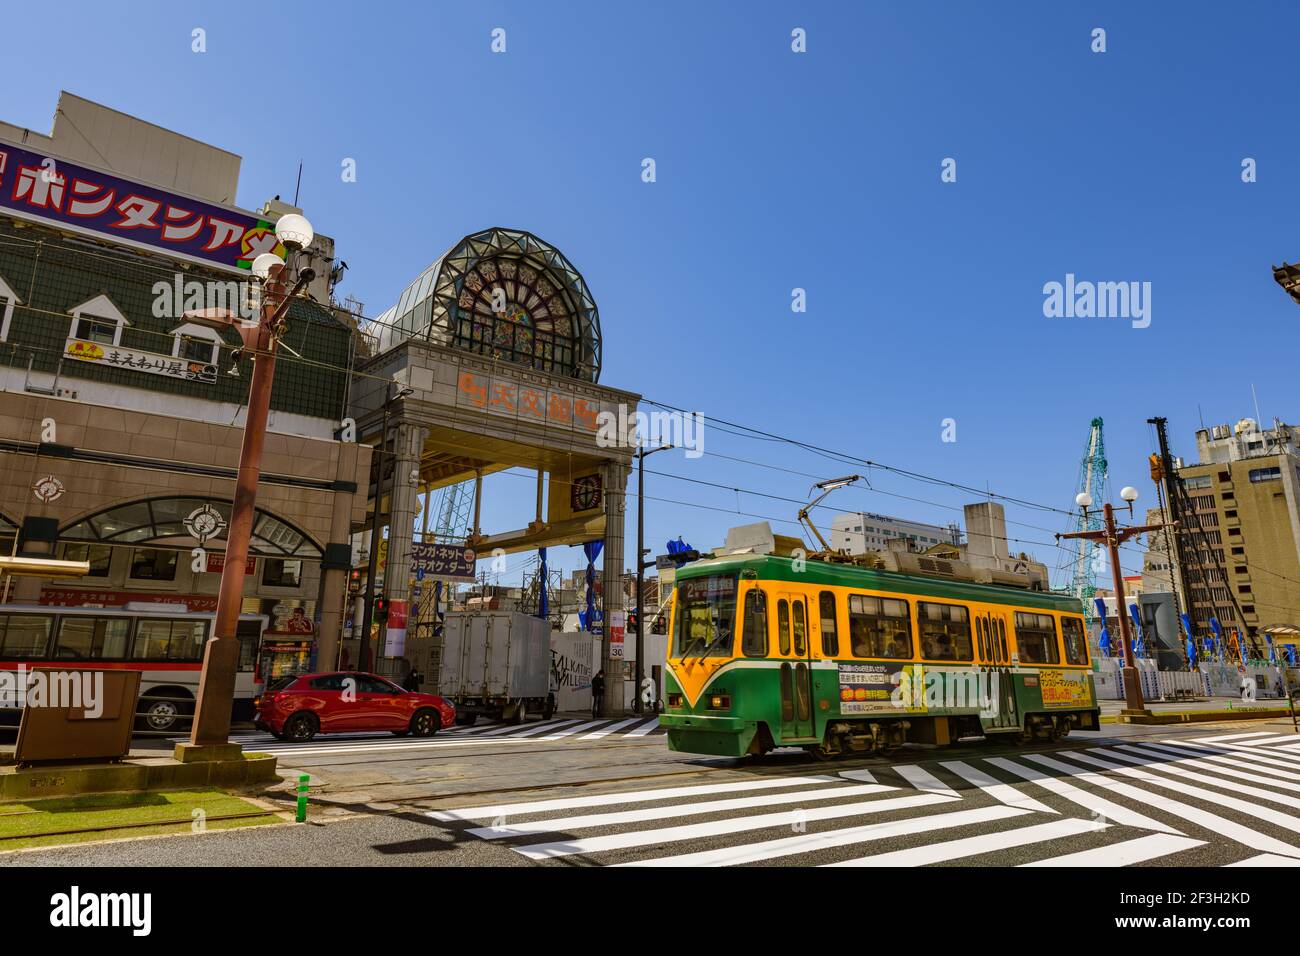 Traditional tram in operation on street in city, Kagoshima, Japan Stock Photo